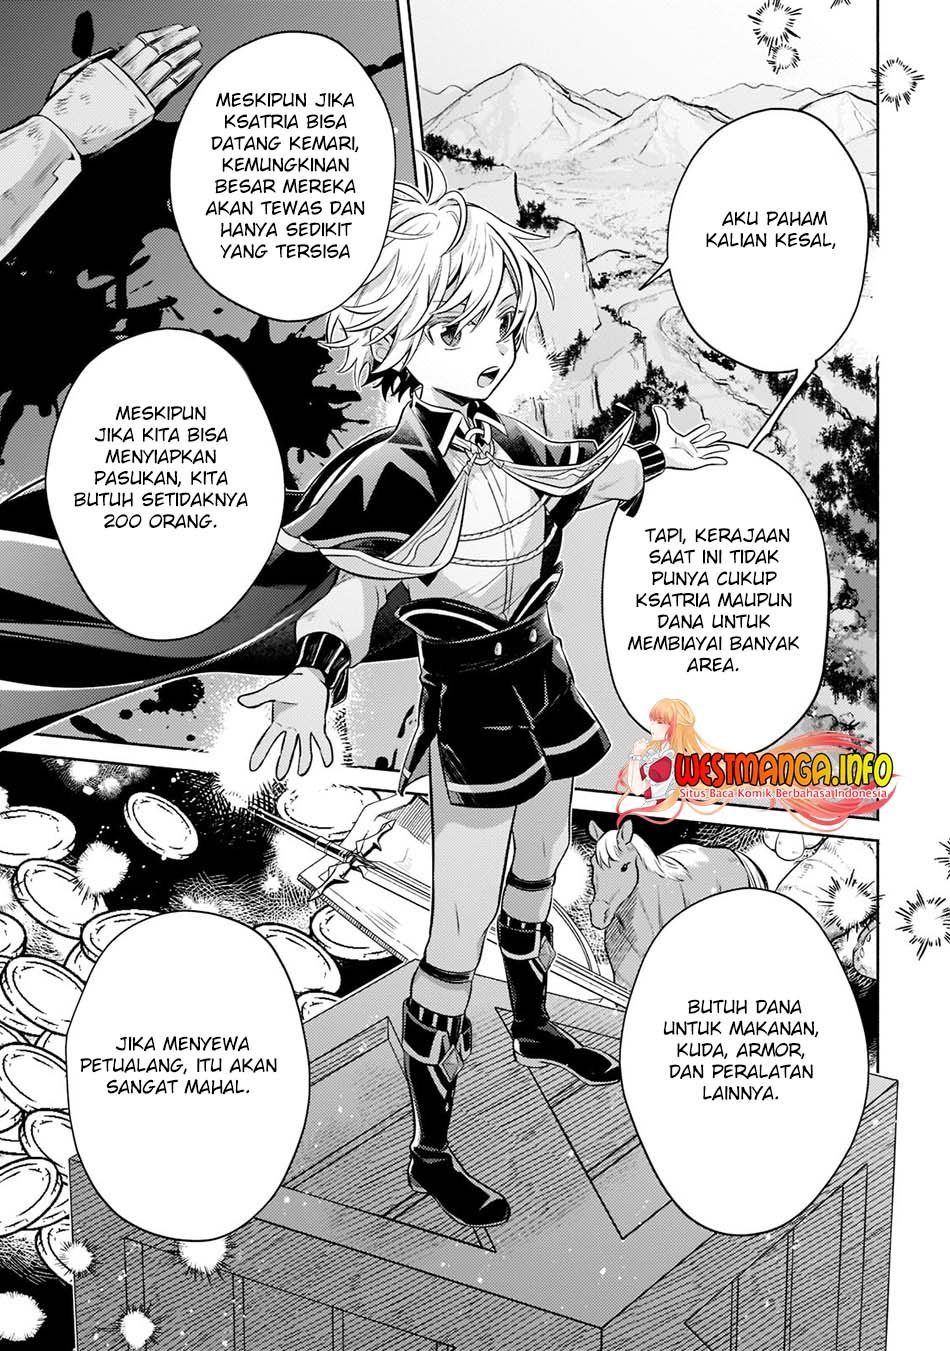 Fun Territory Defense Of The Easy-Going Lord ~The Nameless Village Is Made Into The Strongest Fortified City By Production Magic~ Chapter 07 - 211